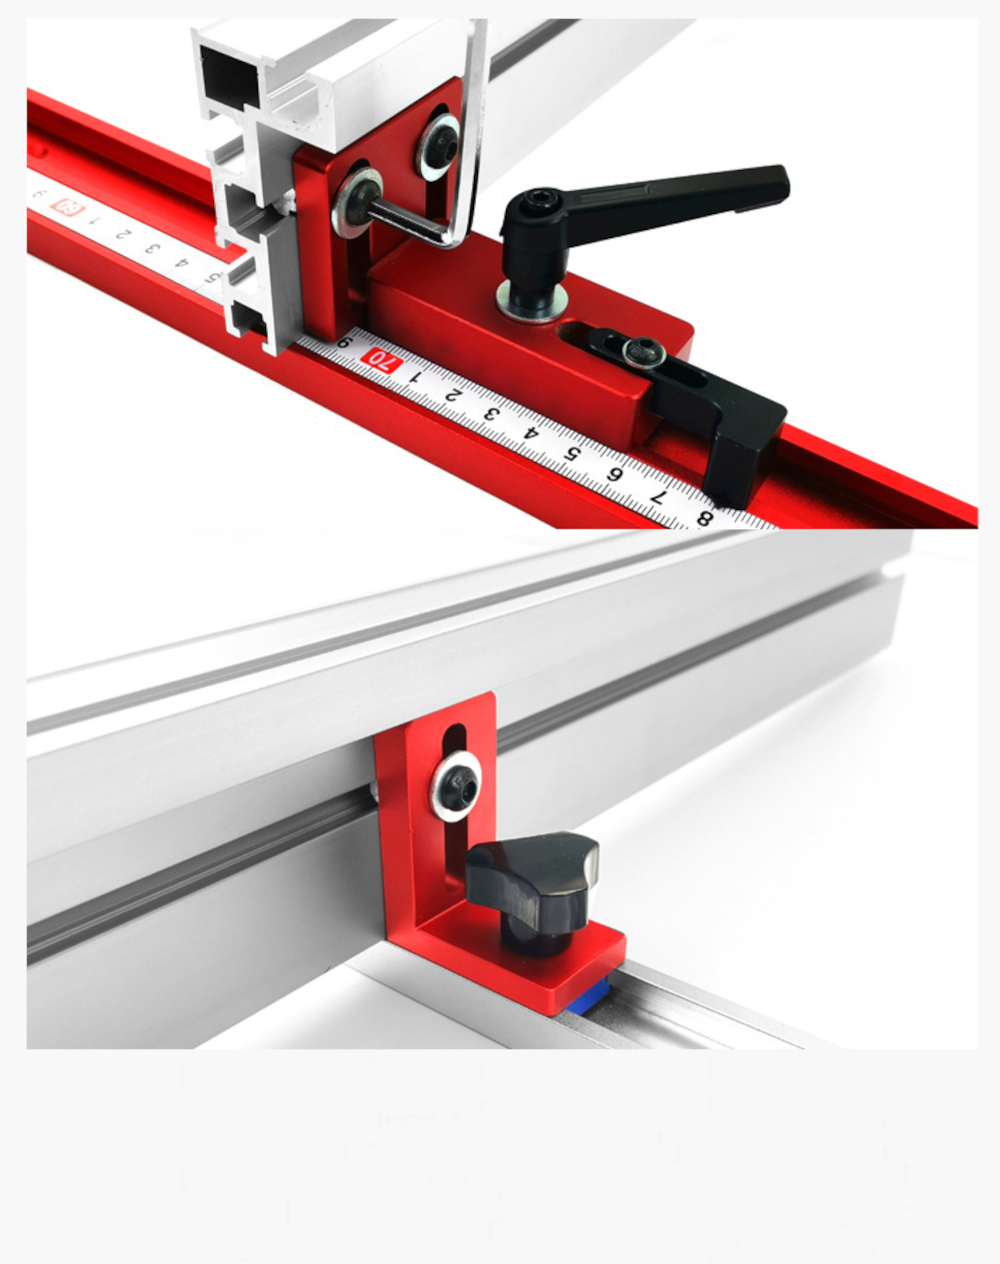 400-1200mm-Miter-Gauge-Fence-75-Type-T-Slot-Aluminium-Woodworking-Fence-Backet-Table-Saw-Woodworking-1805047-13